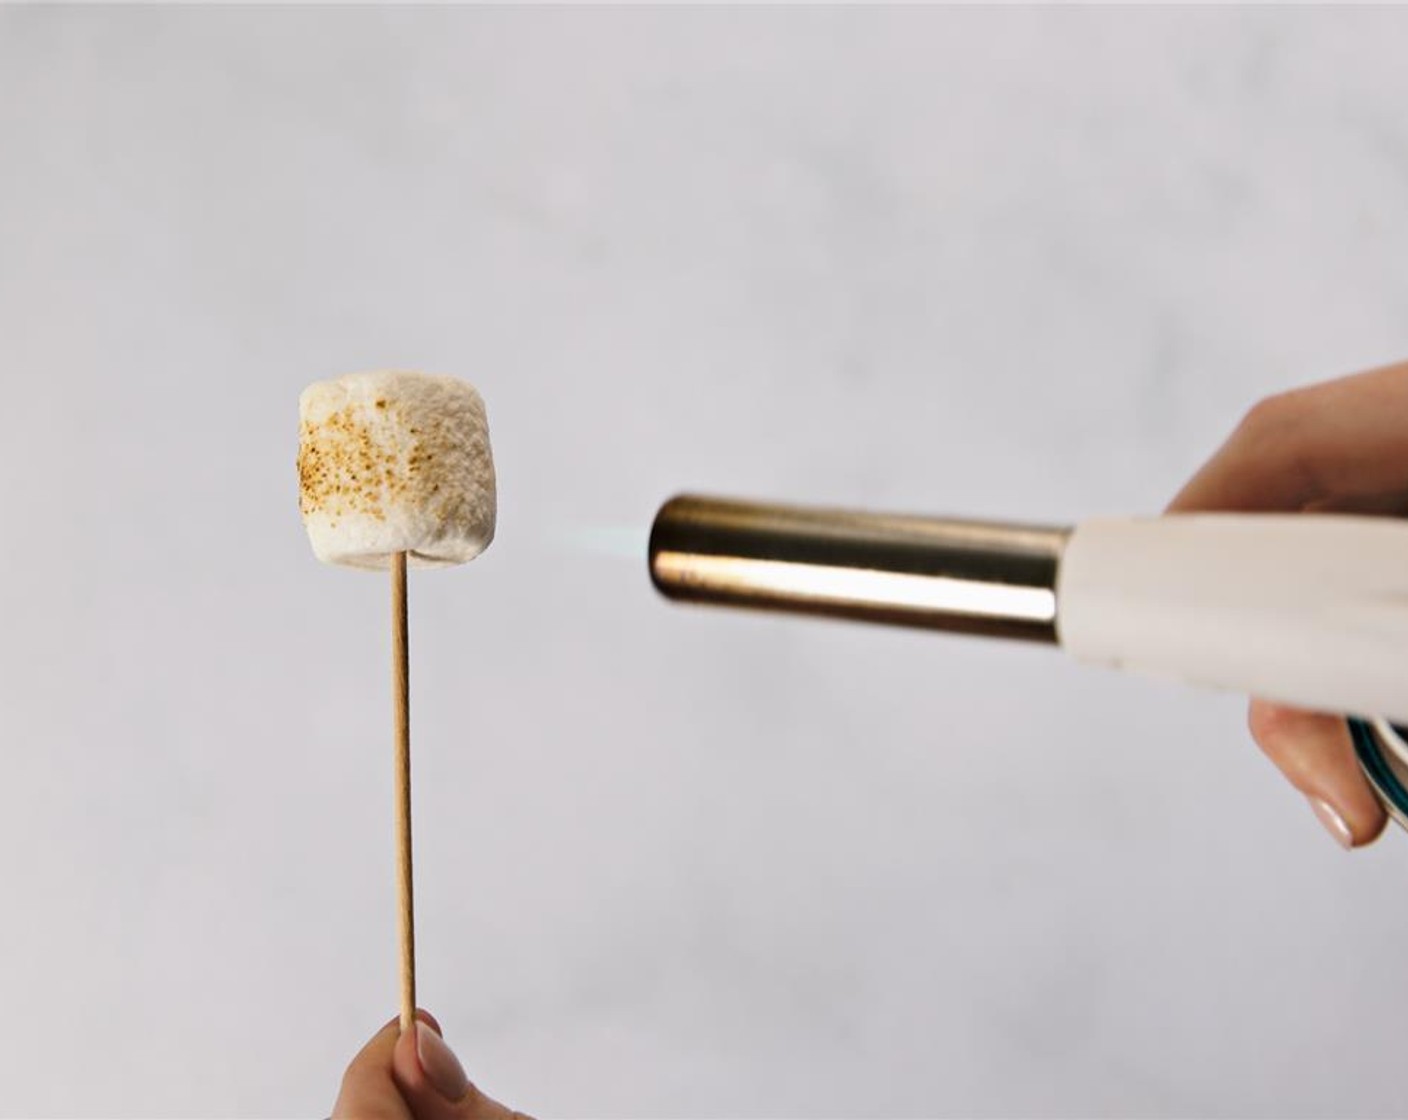 step 2 Using a blowtorch, brown the marshmallow to desired degree of crunchy and golden.